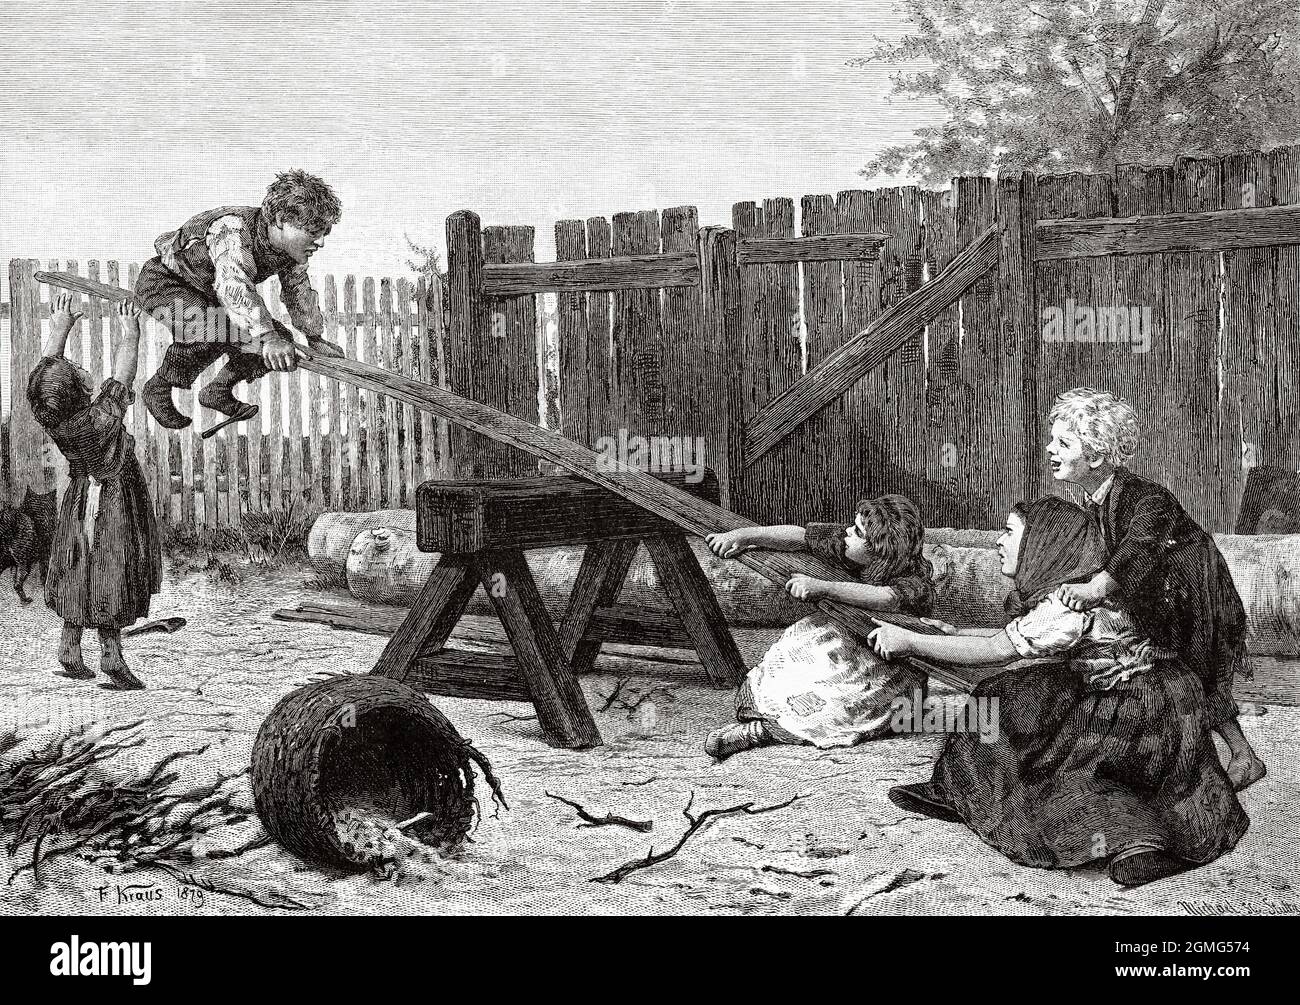 Children playing on a swing, painting of Friedrich Kraus (1826-1894) was a 19th century German engraver, painter, and lithographer. Old 19th century engraved illustration from La Ilustración Artística 1882 Stock Photo